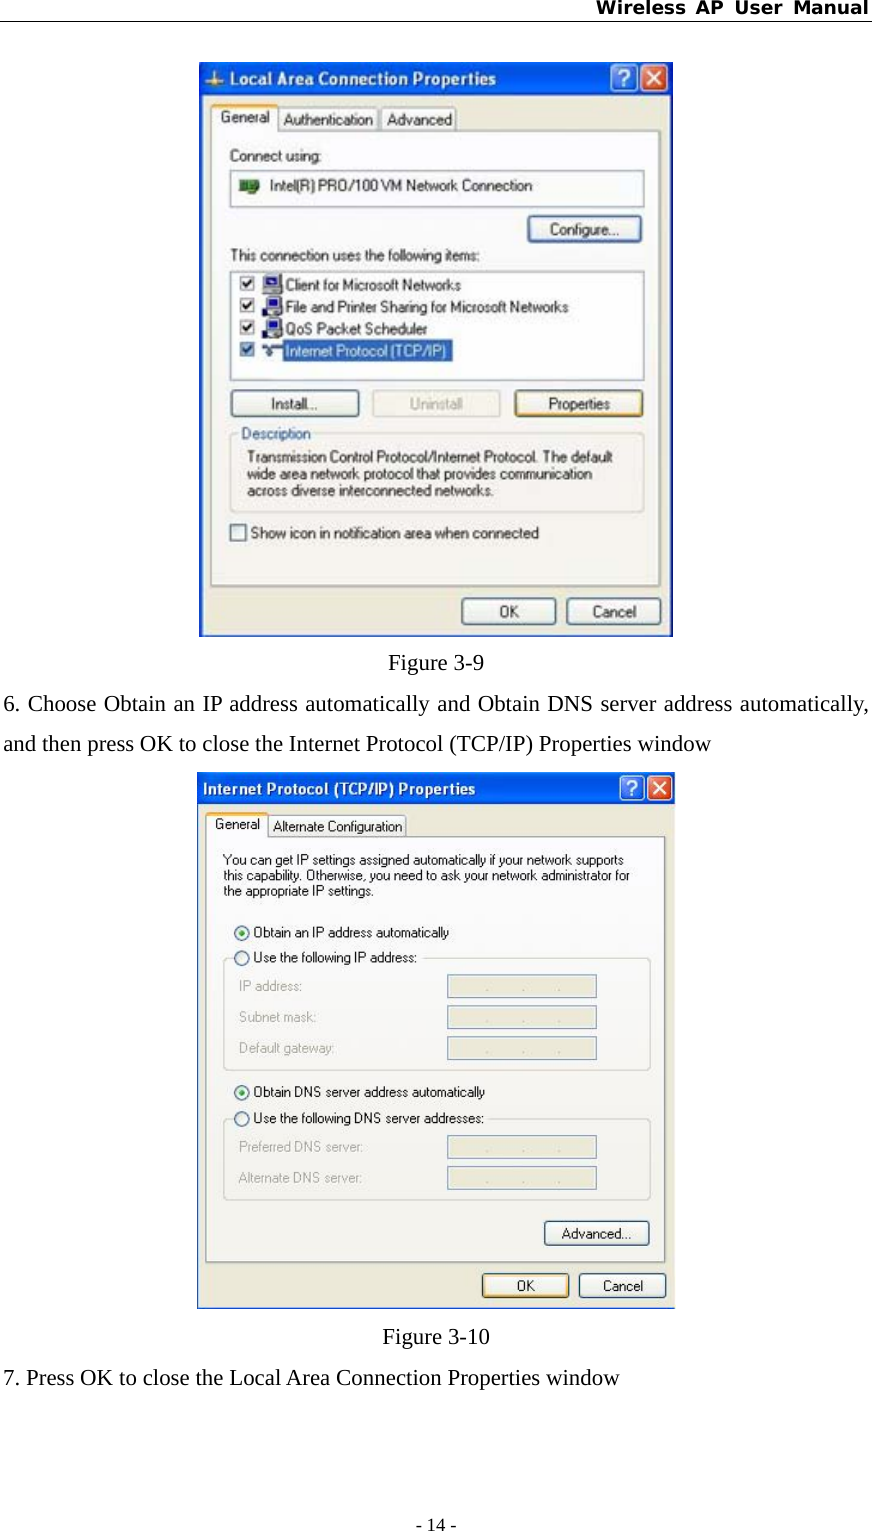 Wireless AP User Manual - 14 -   Figure 3-9 6. Choose Obtain an IP address automatically and Obtain DNS server address automatically, and then press OK to close the Internet Protocol (TCP/IP) Properties window  Figure 3-10 7. Press OK to close the Local Area Connection Properties window 